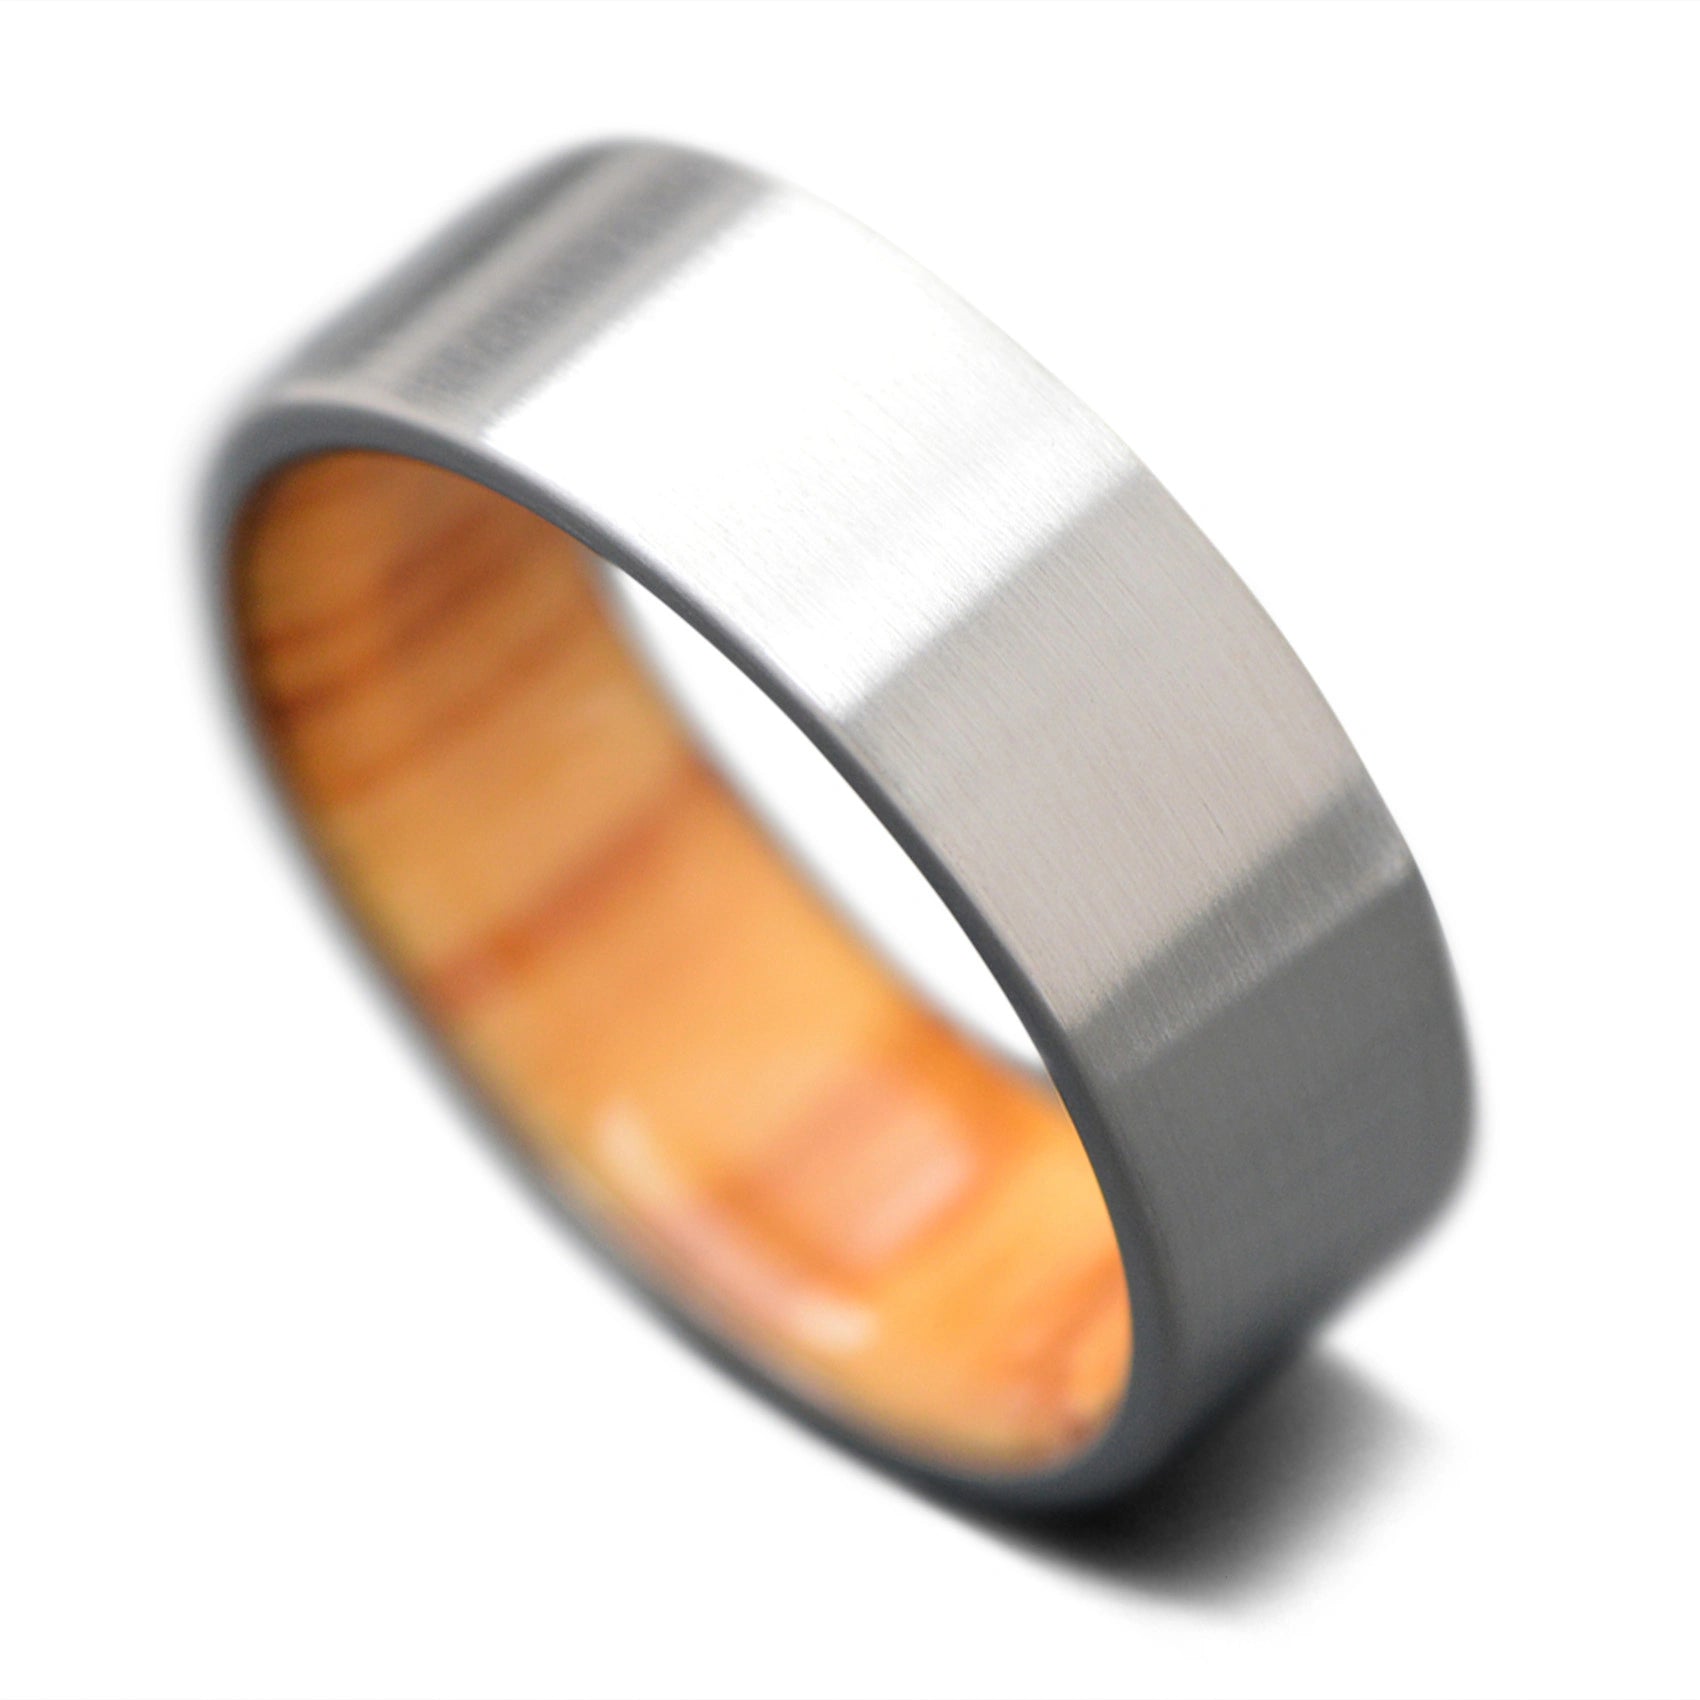 Titanium Core Ring with Olivewood inner sleeve, 8mm -THE TITAN